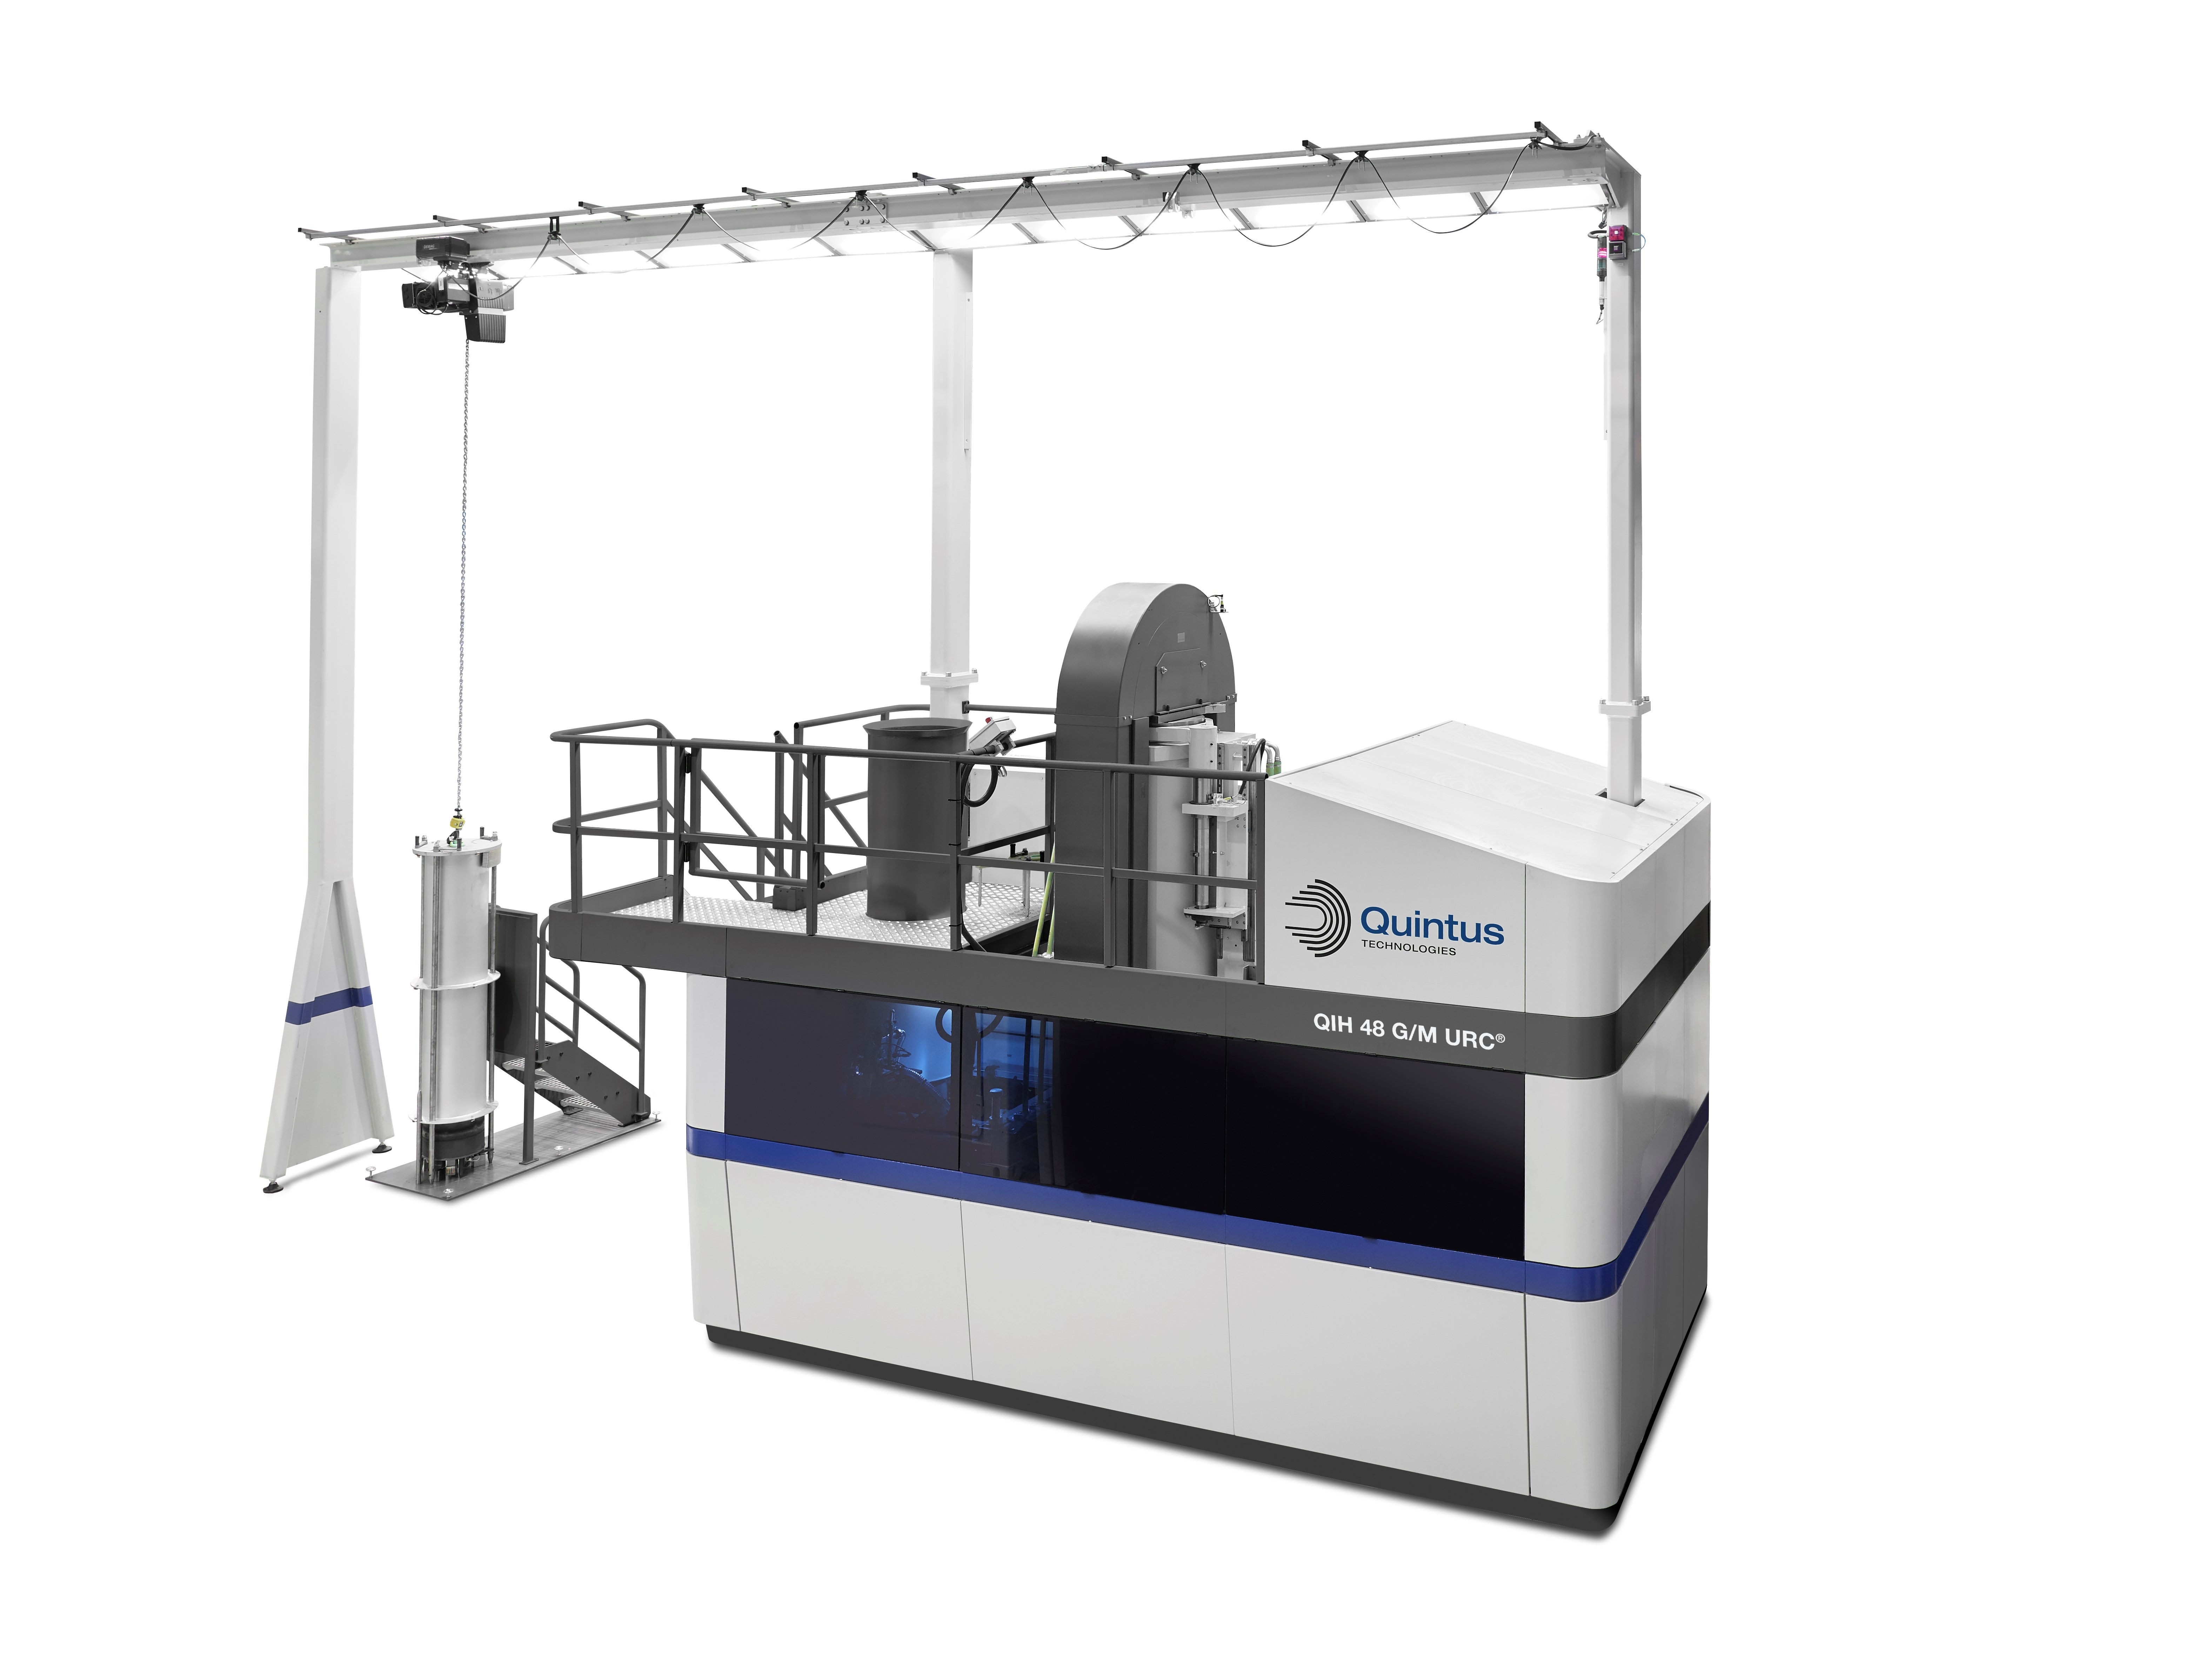 The QIH 48 M URC press is equipped with Quintus’ patented uniform rapid cooling URC technology. (Photo courtesy Quintus Technologies.)